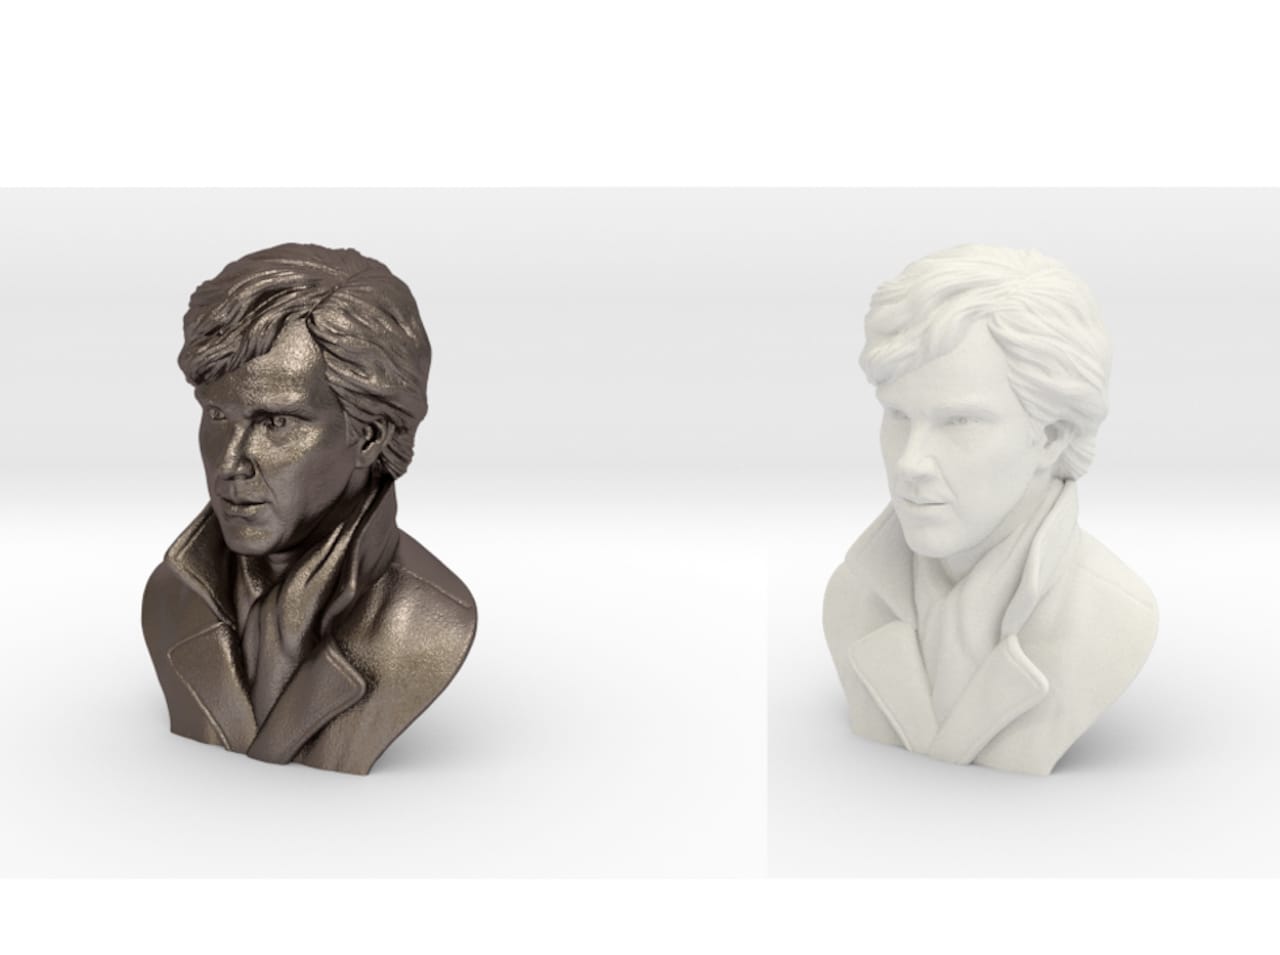  Benedict Cumberbatch in stainless steel (left) and standard nylon (right) 